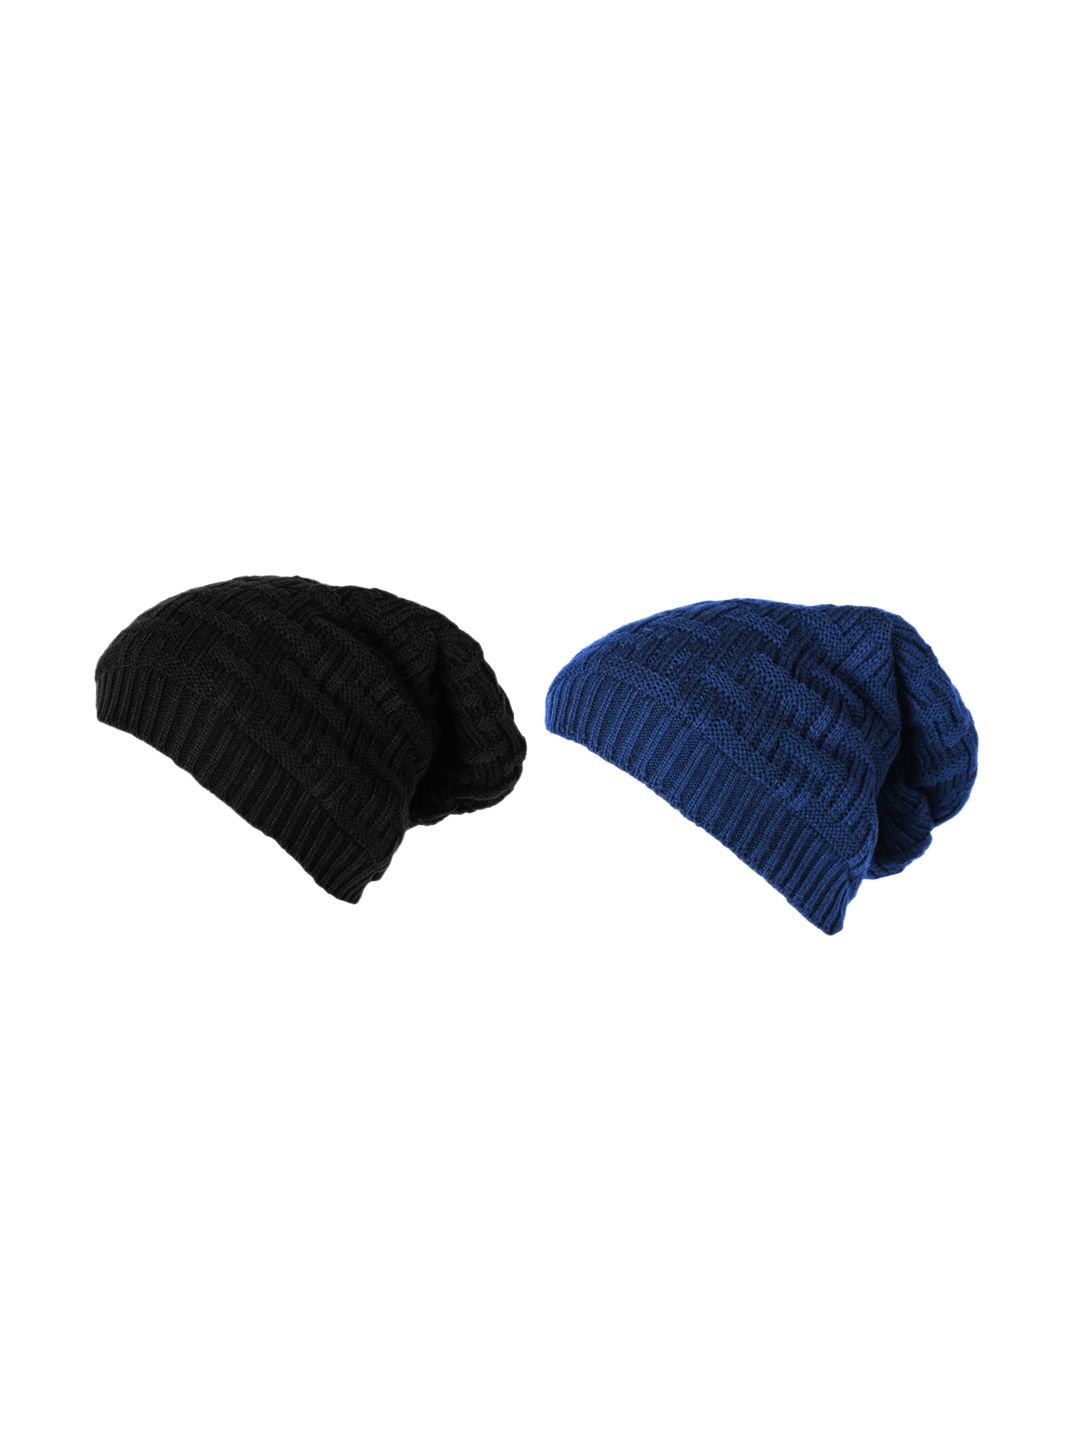 Knotyy Unisex Set of 2 Beanie Price in India